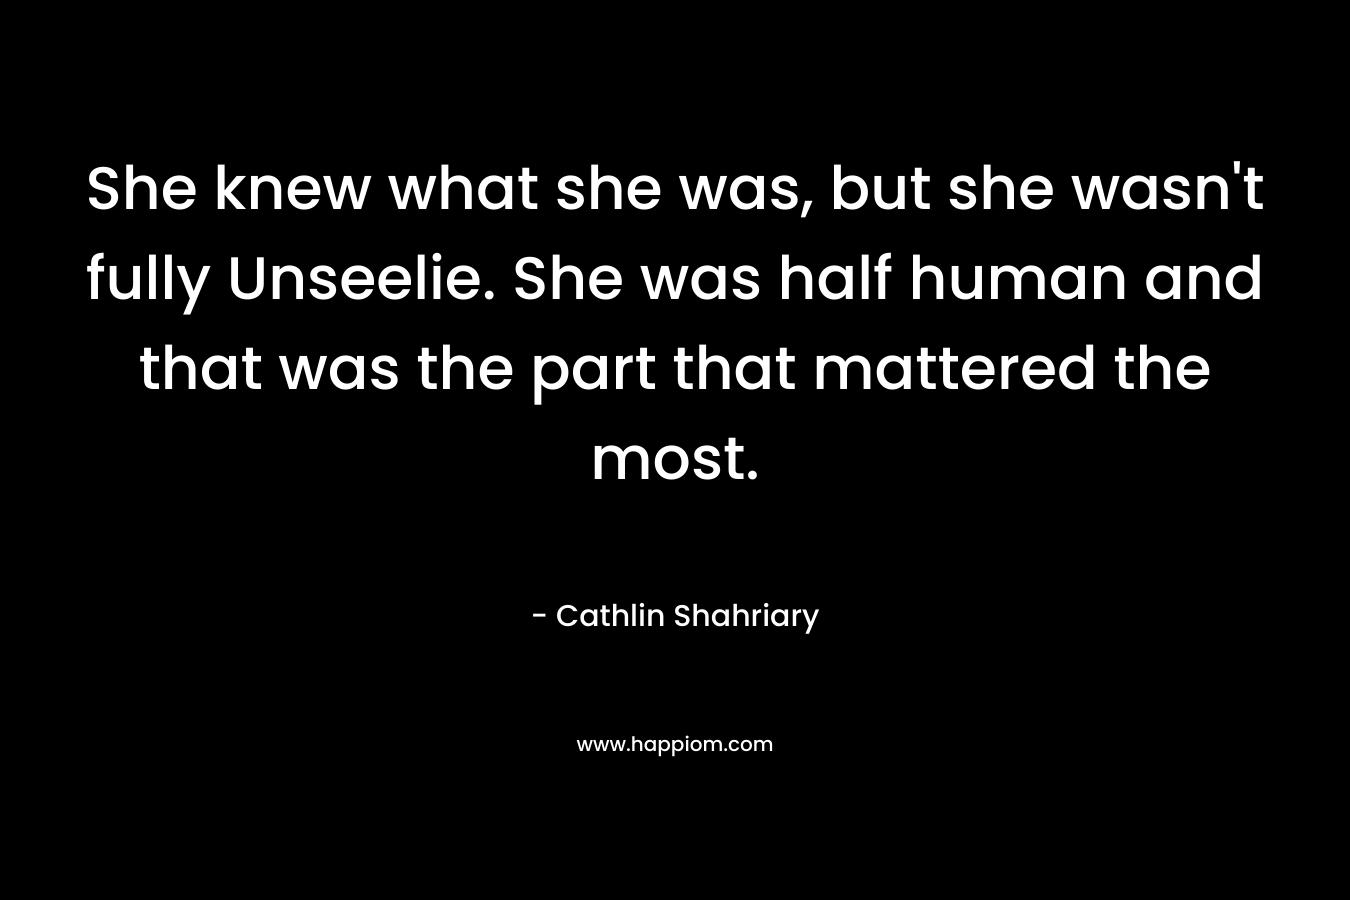 She knew what she was, but she wasn’t fully Unseelie. She was half human and that was the part that mattered the most. – Cathlin Shahriary